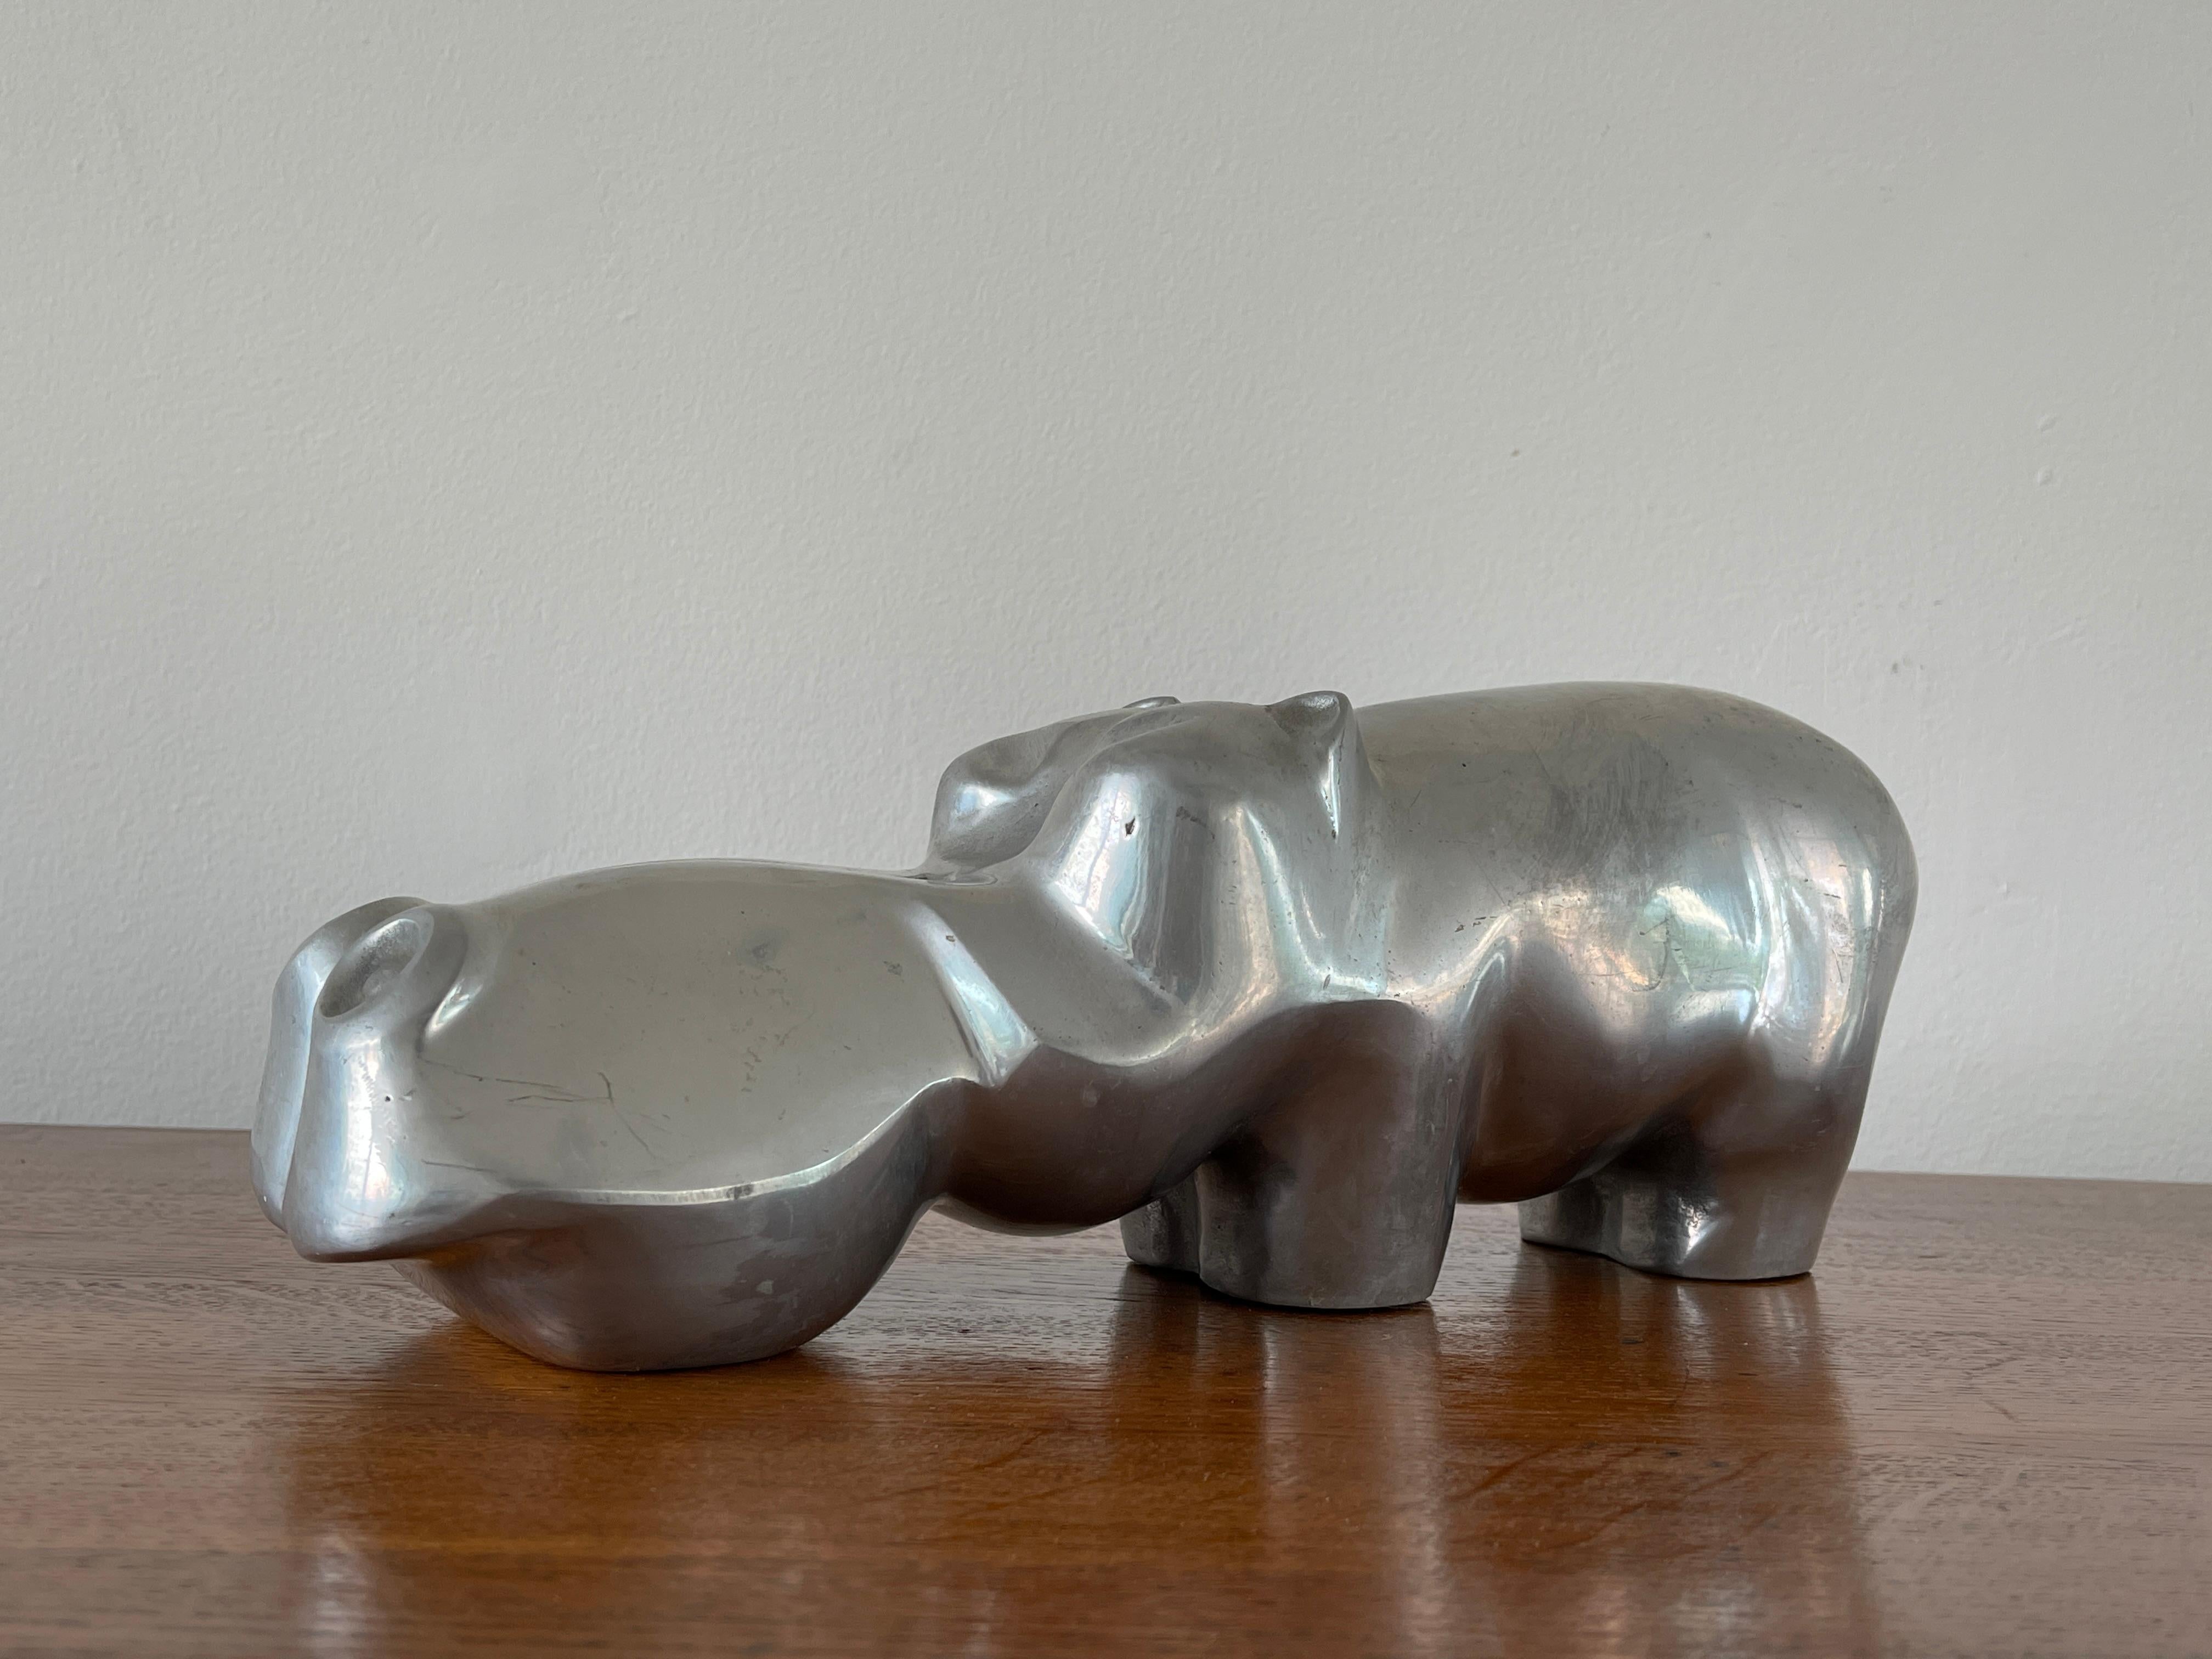 Cast aluminum Hippopotamus sculpture by David Parkin.
PARKER series - Signed and numbered 260/450.--
 Dimensions: H: 6.5 inches: W: 5 inches: D: 15 inches ---.